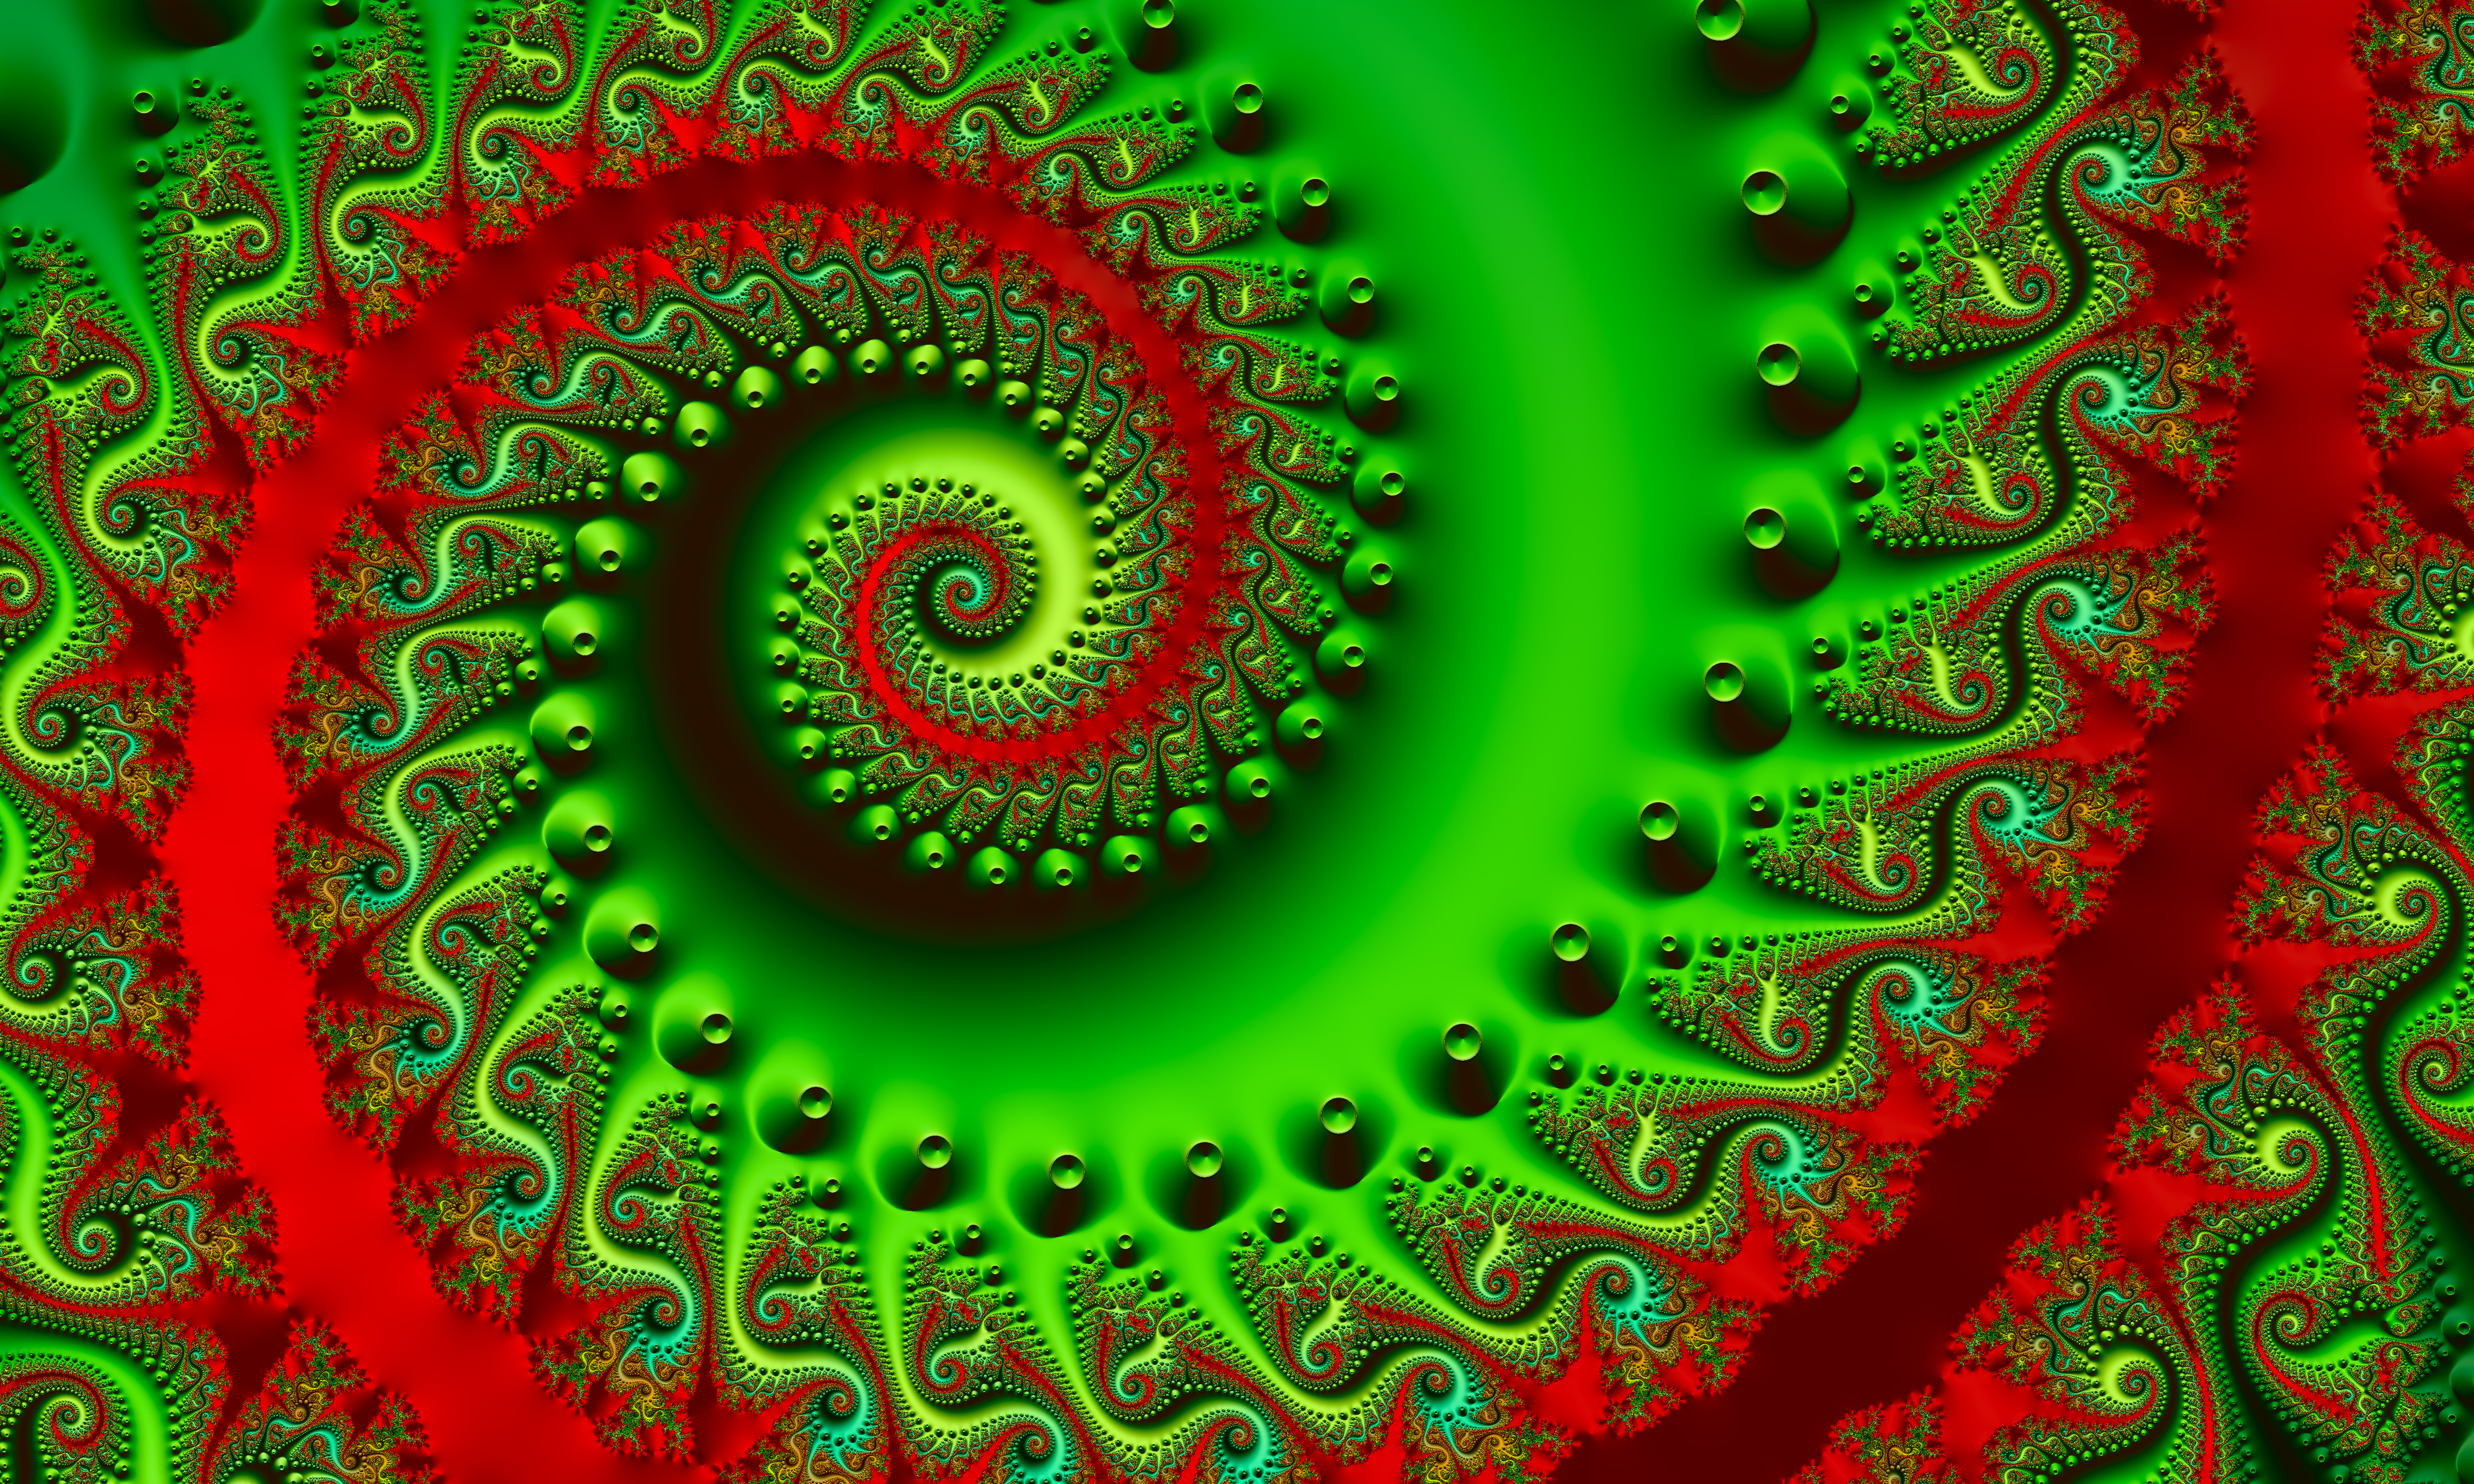 3d, spiral, bright, motley, multicolored, fractal, swirling, involute phone background